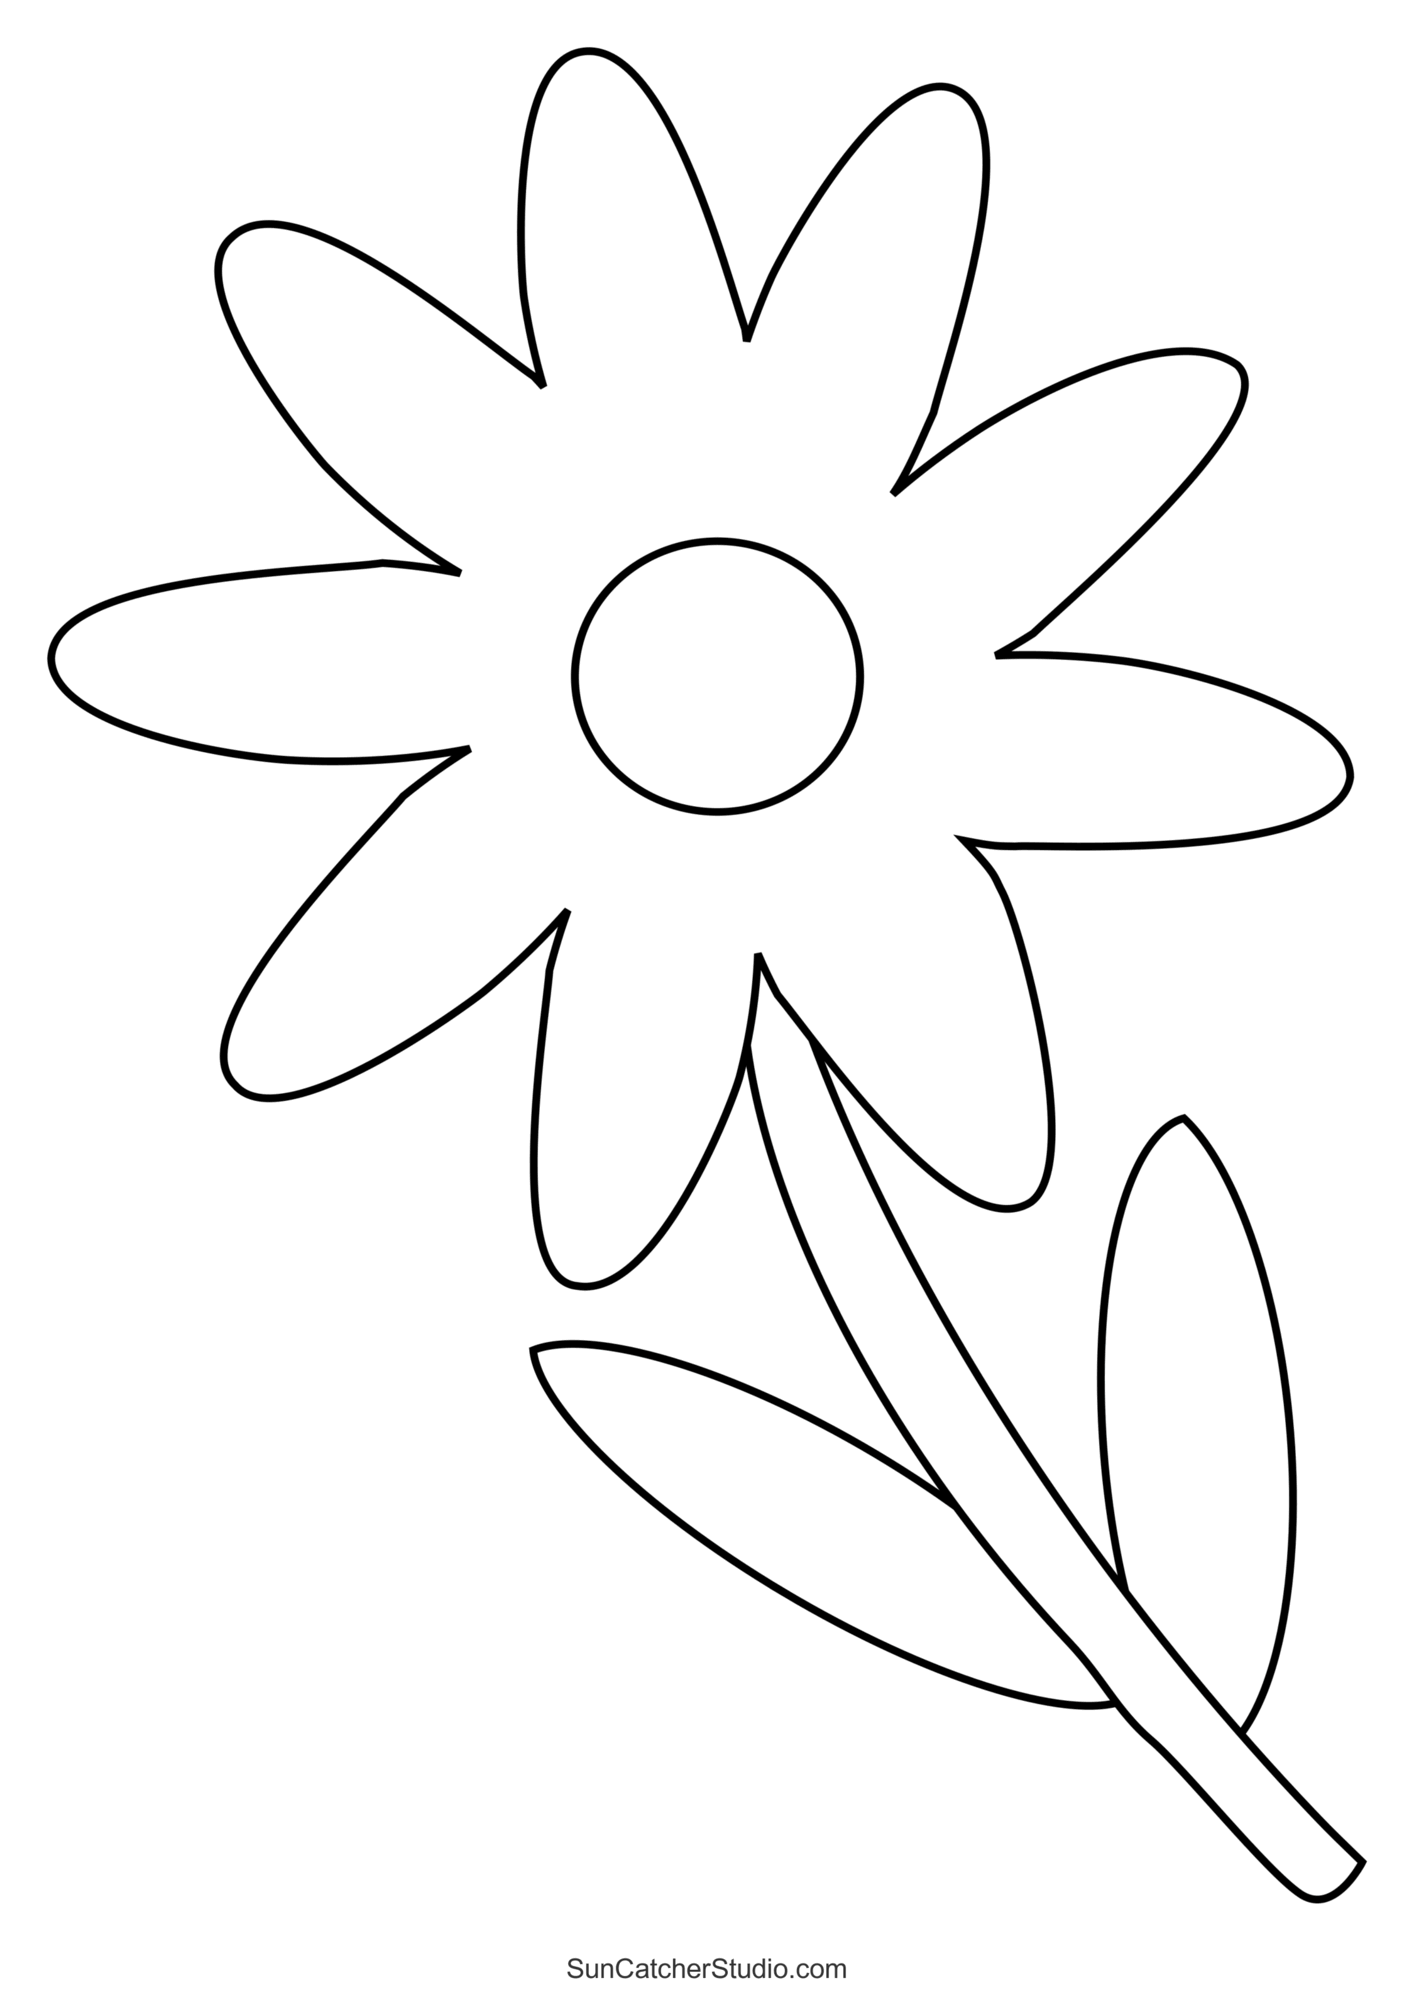 Flower Shapes, Free Printable Templates & Coloring Pages